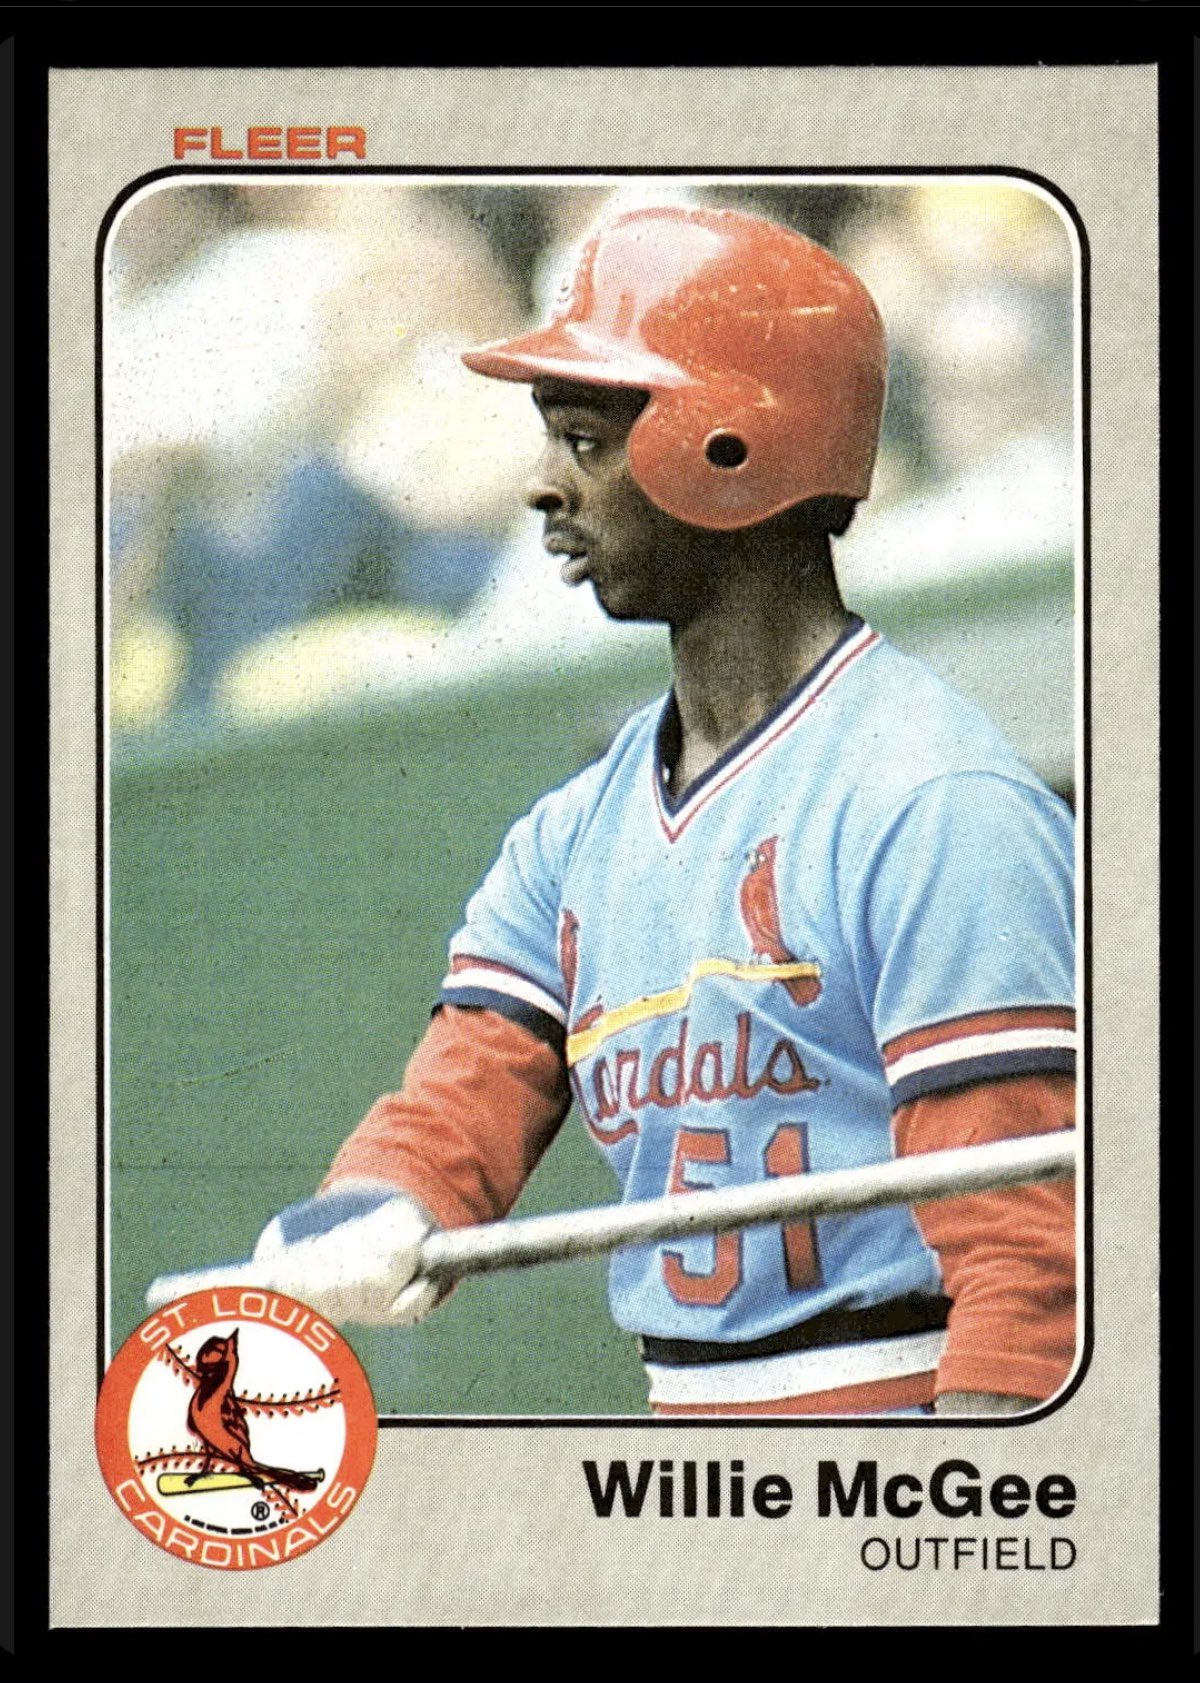 Super 70s Sports on X: Willie McGee's career .295 batting average